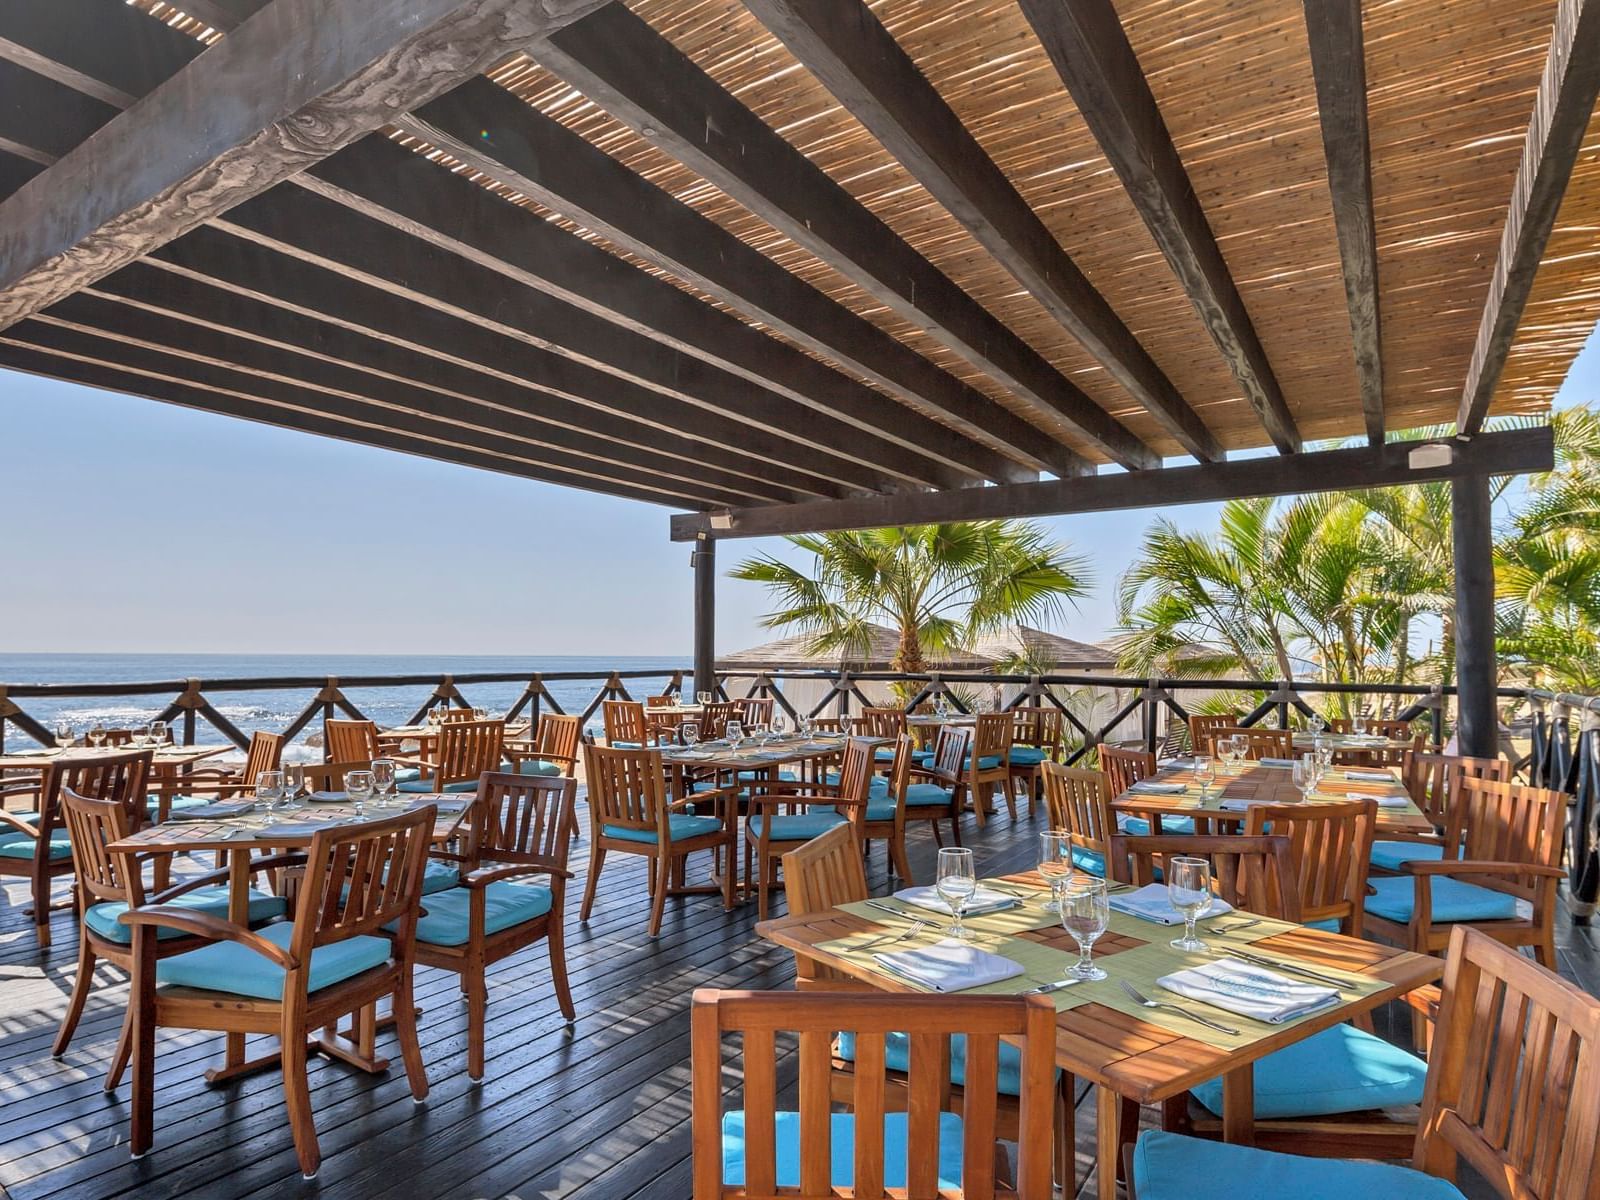 Open & airy dining area with a sea view at La Colección Resorts